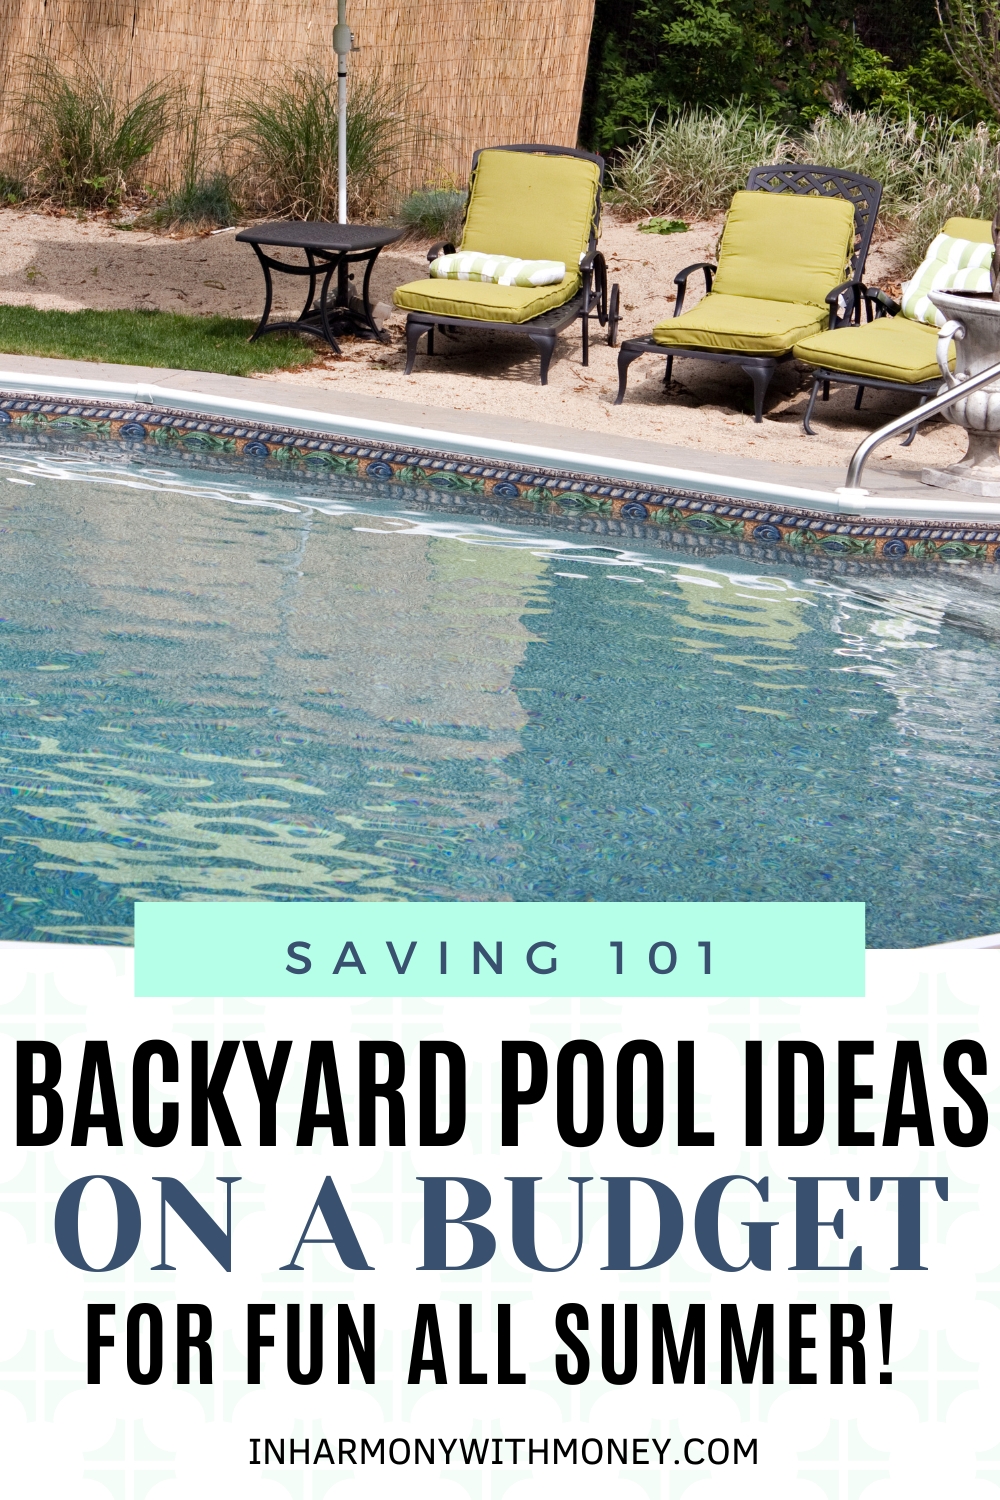 in-ground swimming pool with text backyard pool ideas on a budget